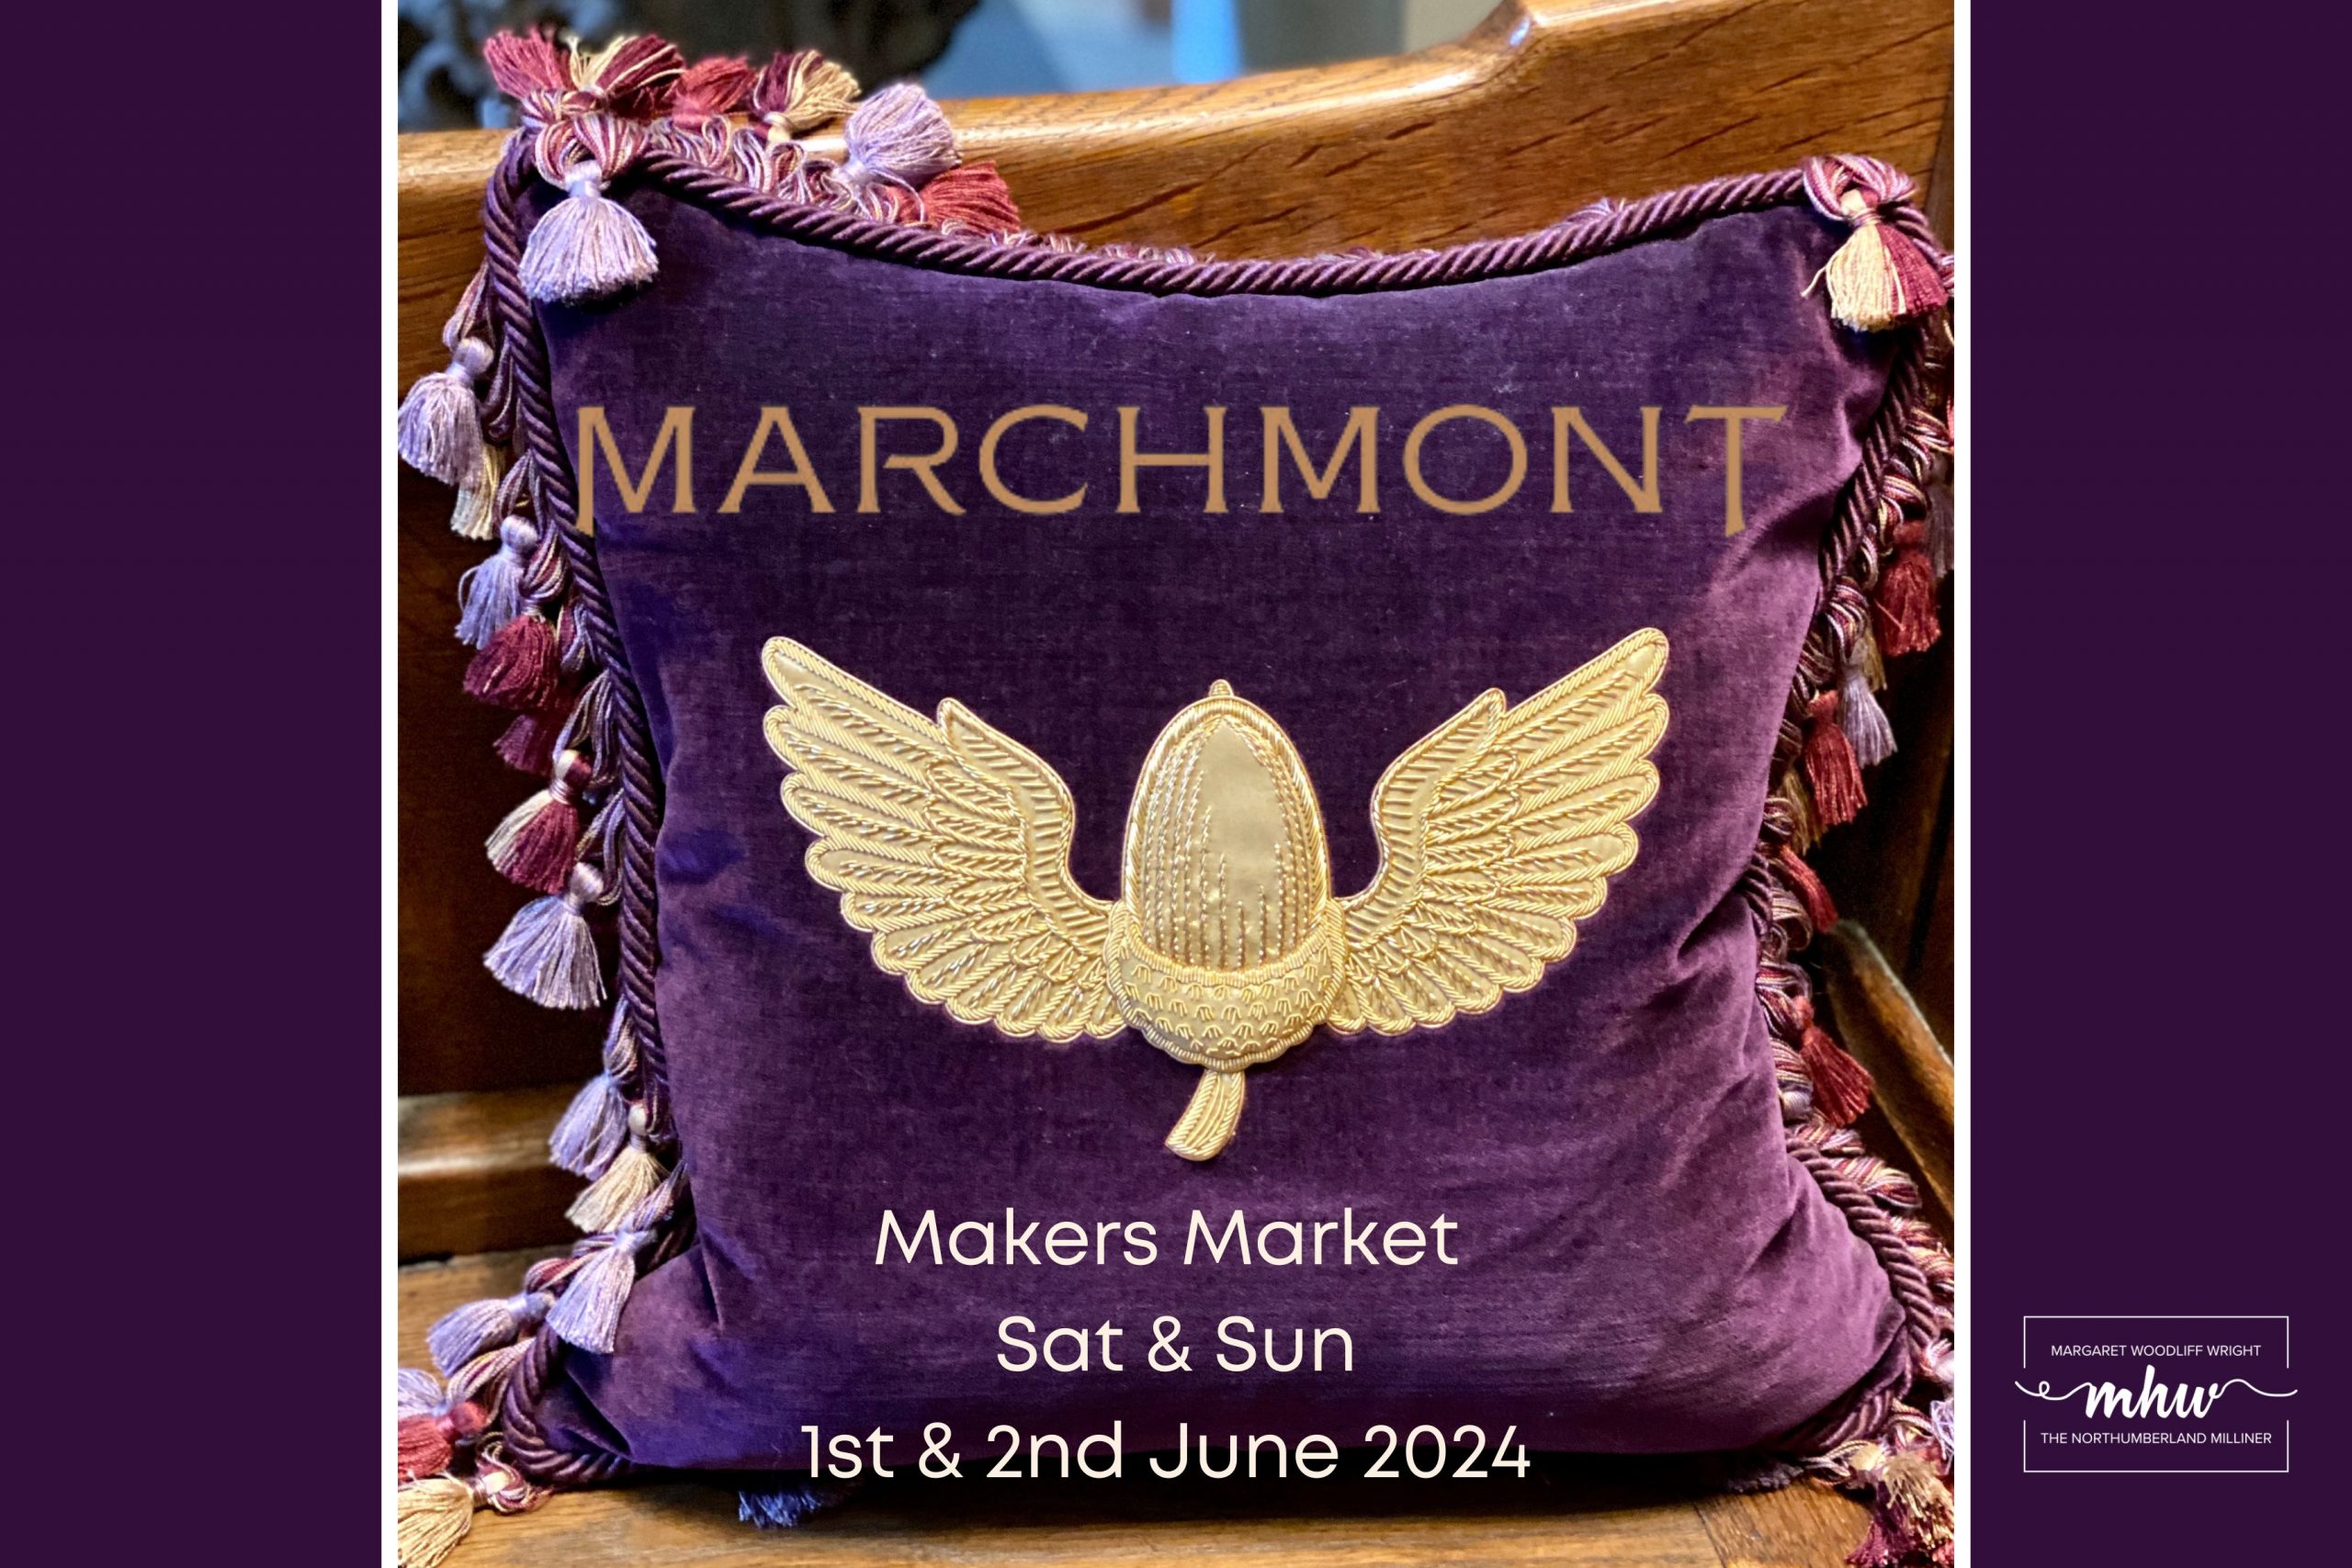 Marchmont House Makers Market Saturday and Sunday 1st and 2nd June 2024